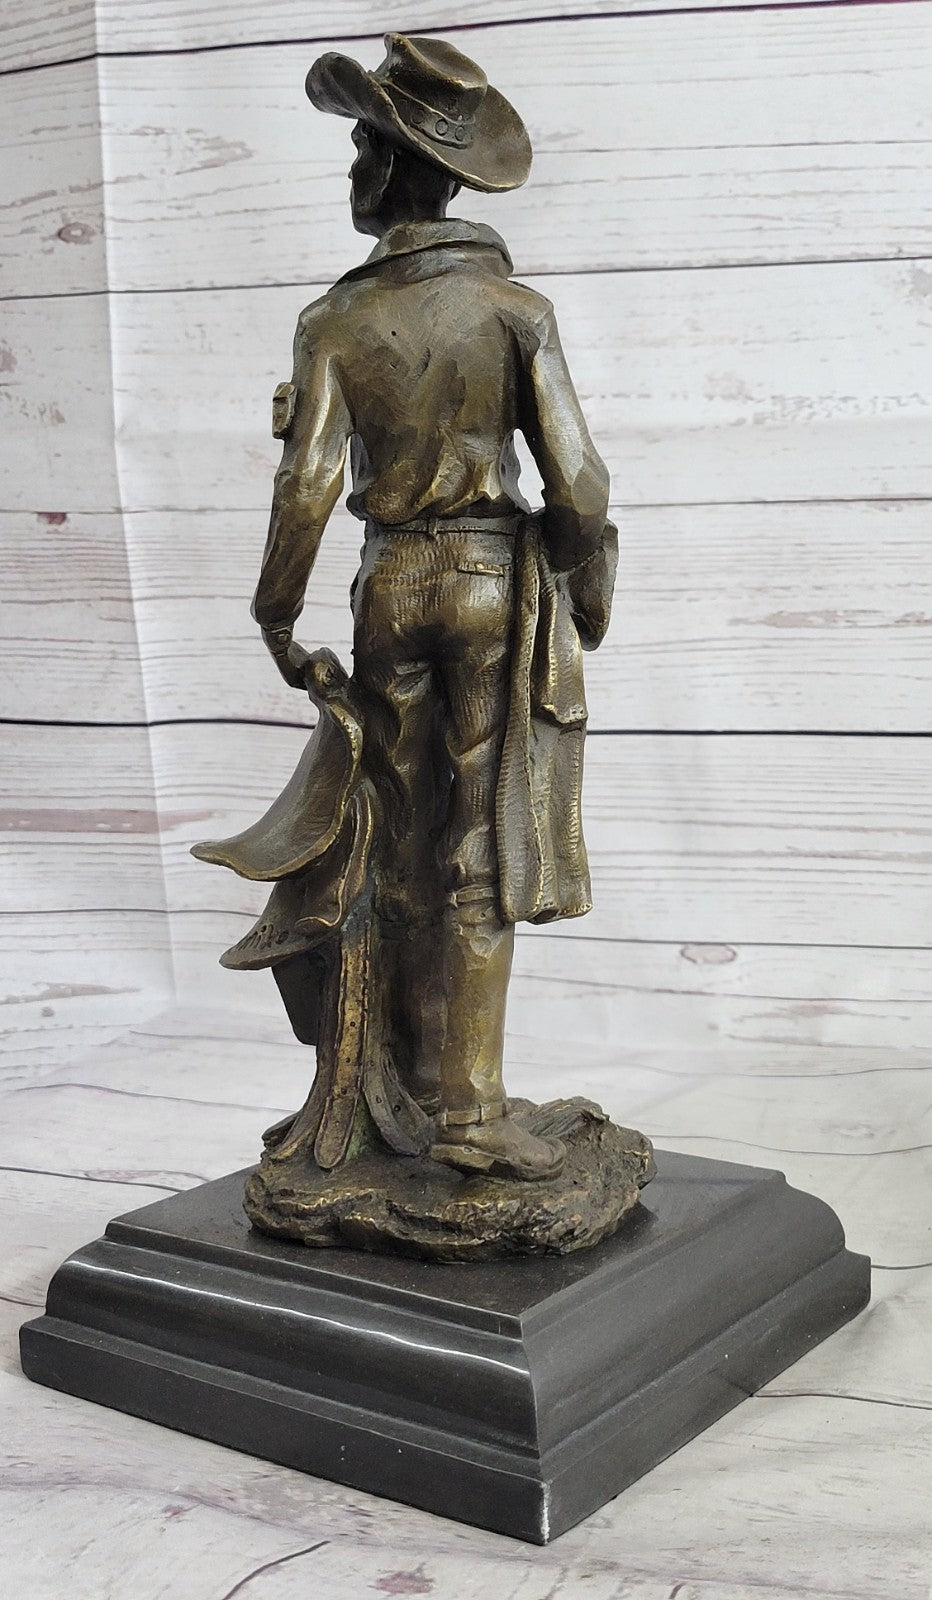 Handcrafted bronze sculpture SALE His Holding Cowboy Old Kamiko Original Signed